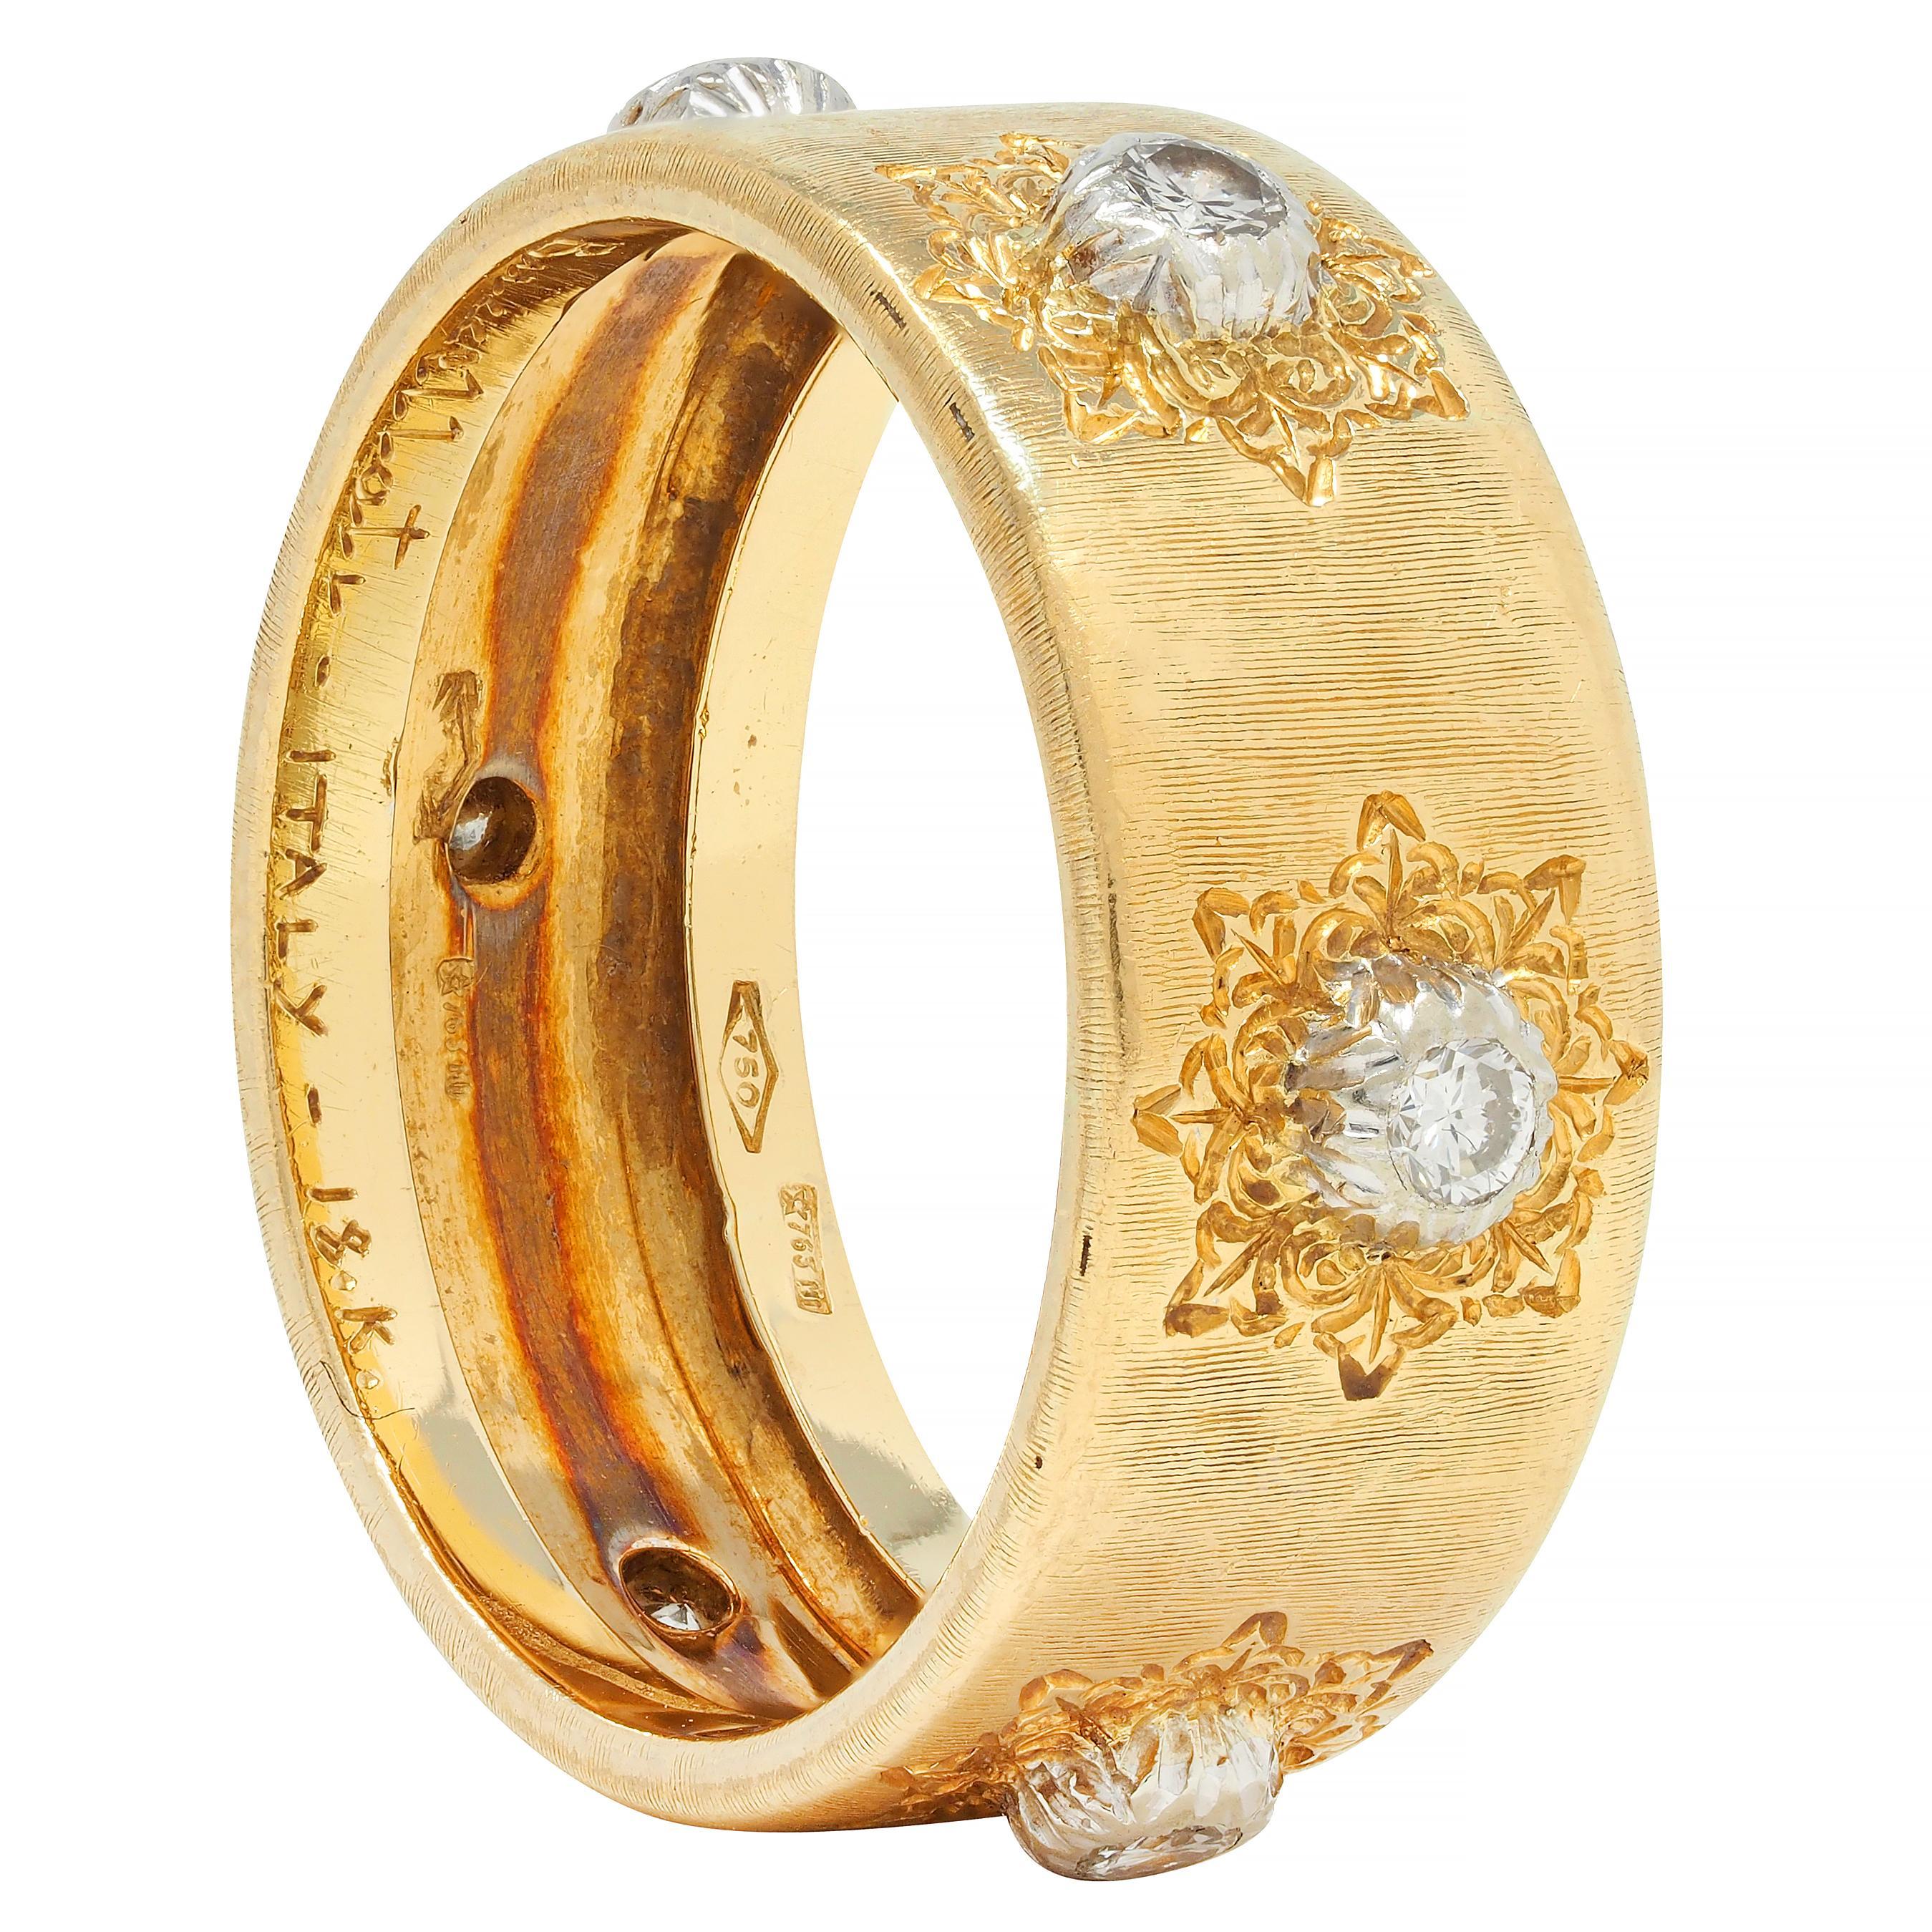 Designed as a wide yellow gold band with very fine linear rigato texture throughout 
Featuring six white gold stations atop an engraved lace motif
Each centering a round brilliant cut diamond
Weighing approximately 0.18 carat total
Eye clean and